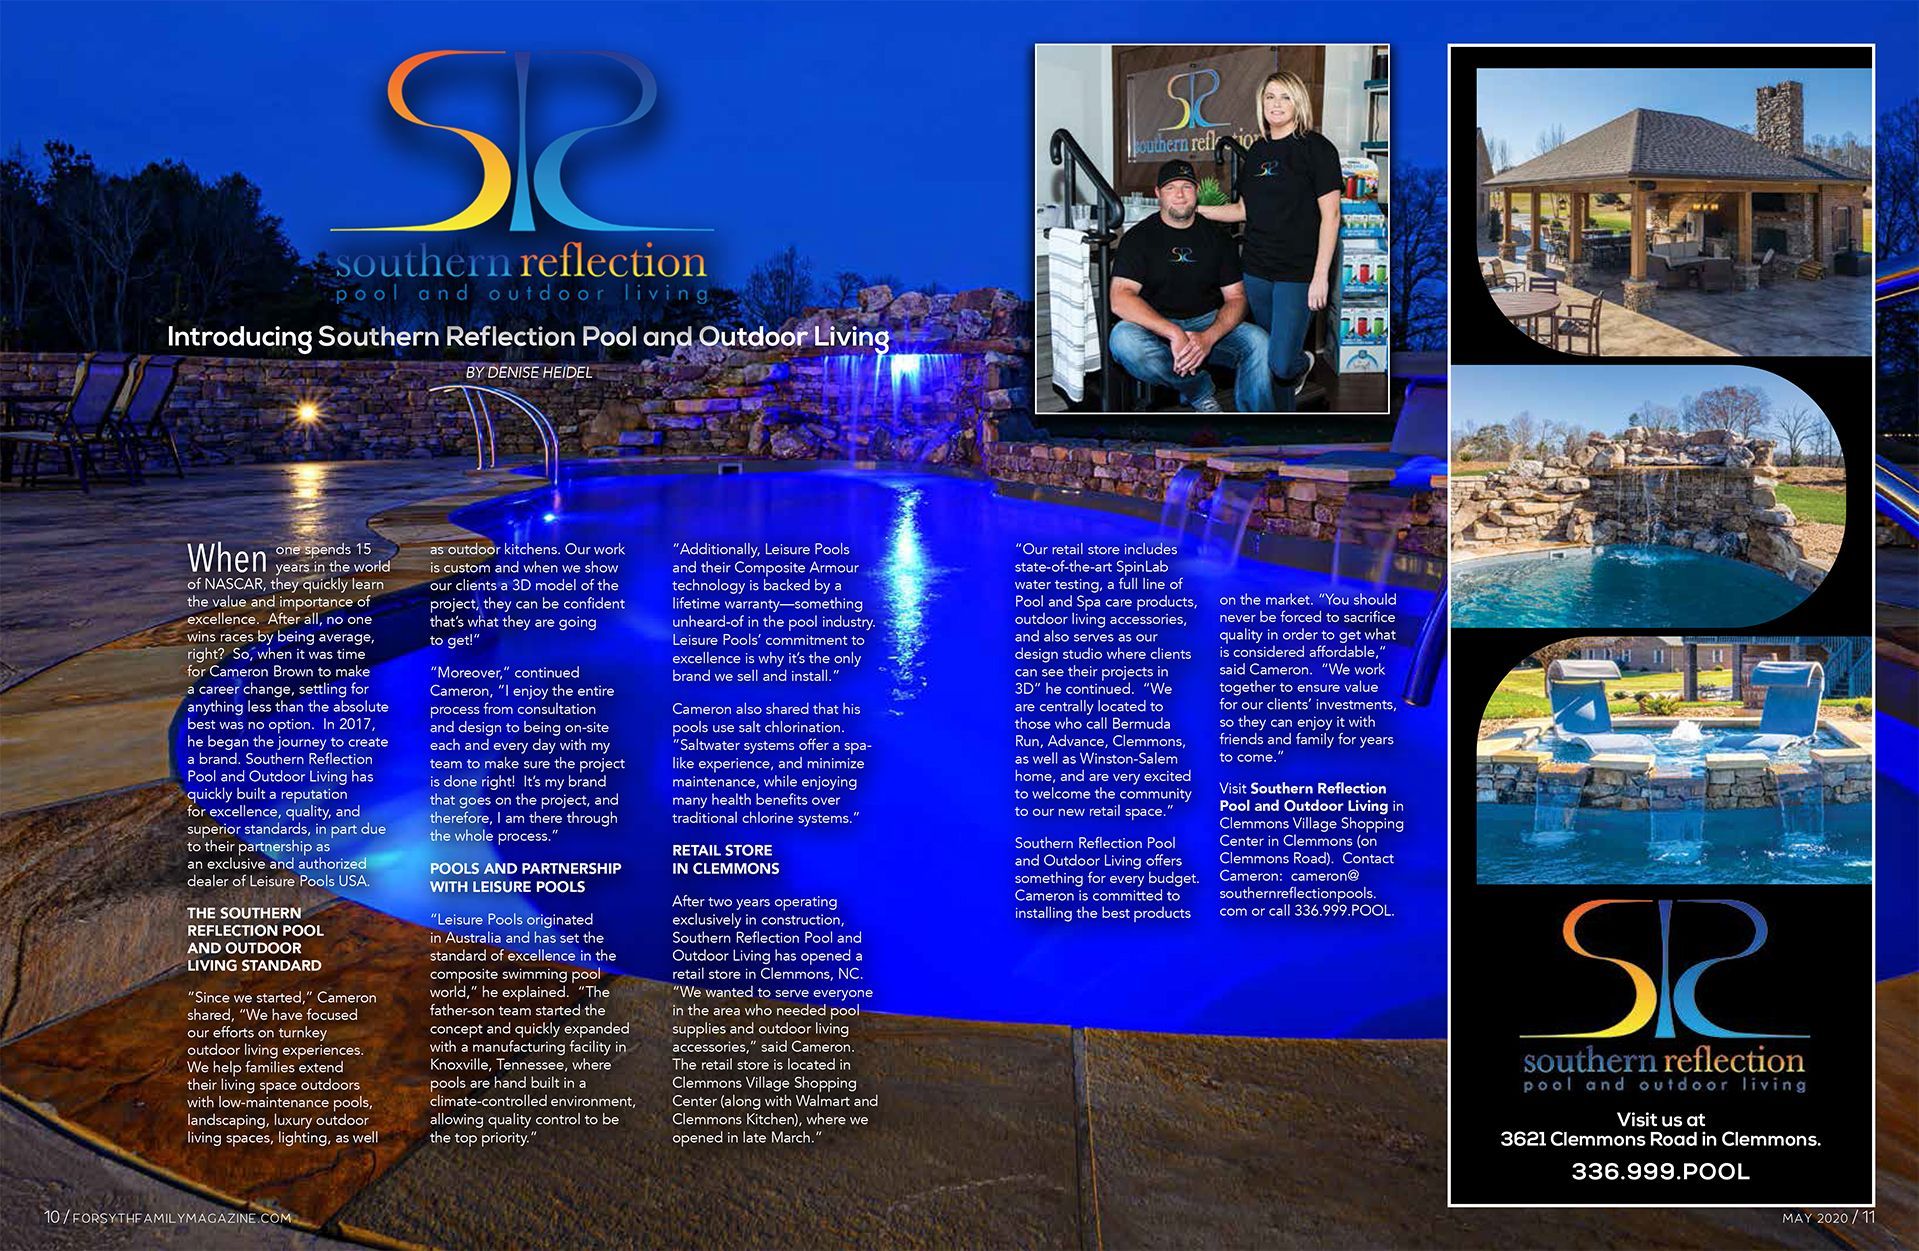 Southern Reflection Pool & Outdoor Living LLC brochure